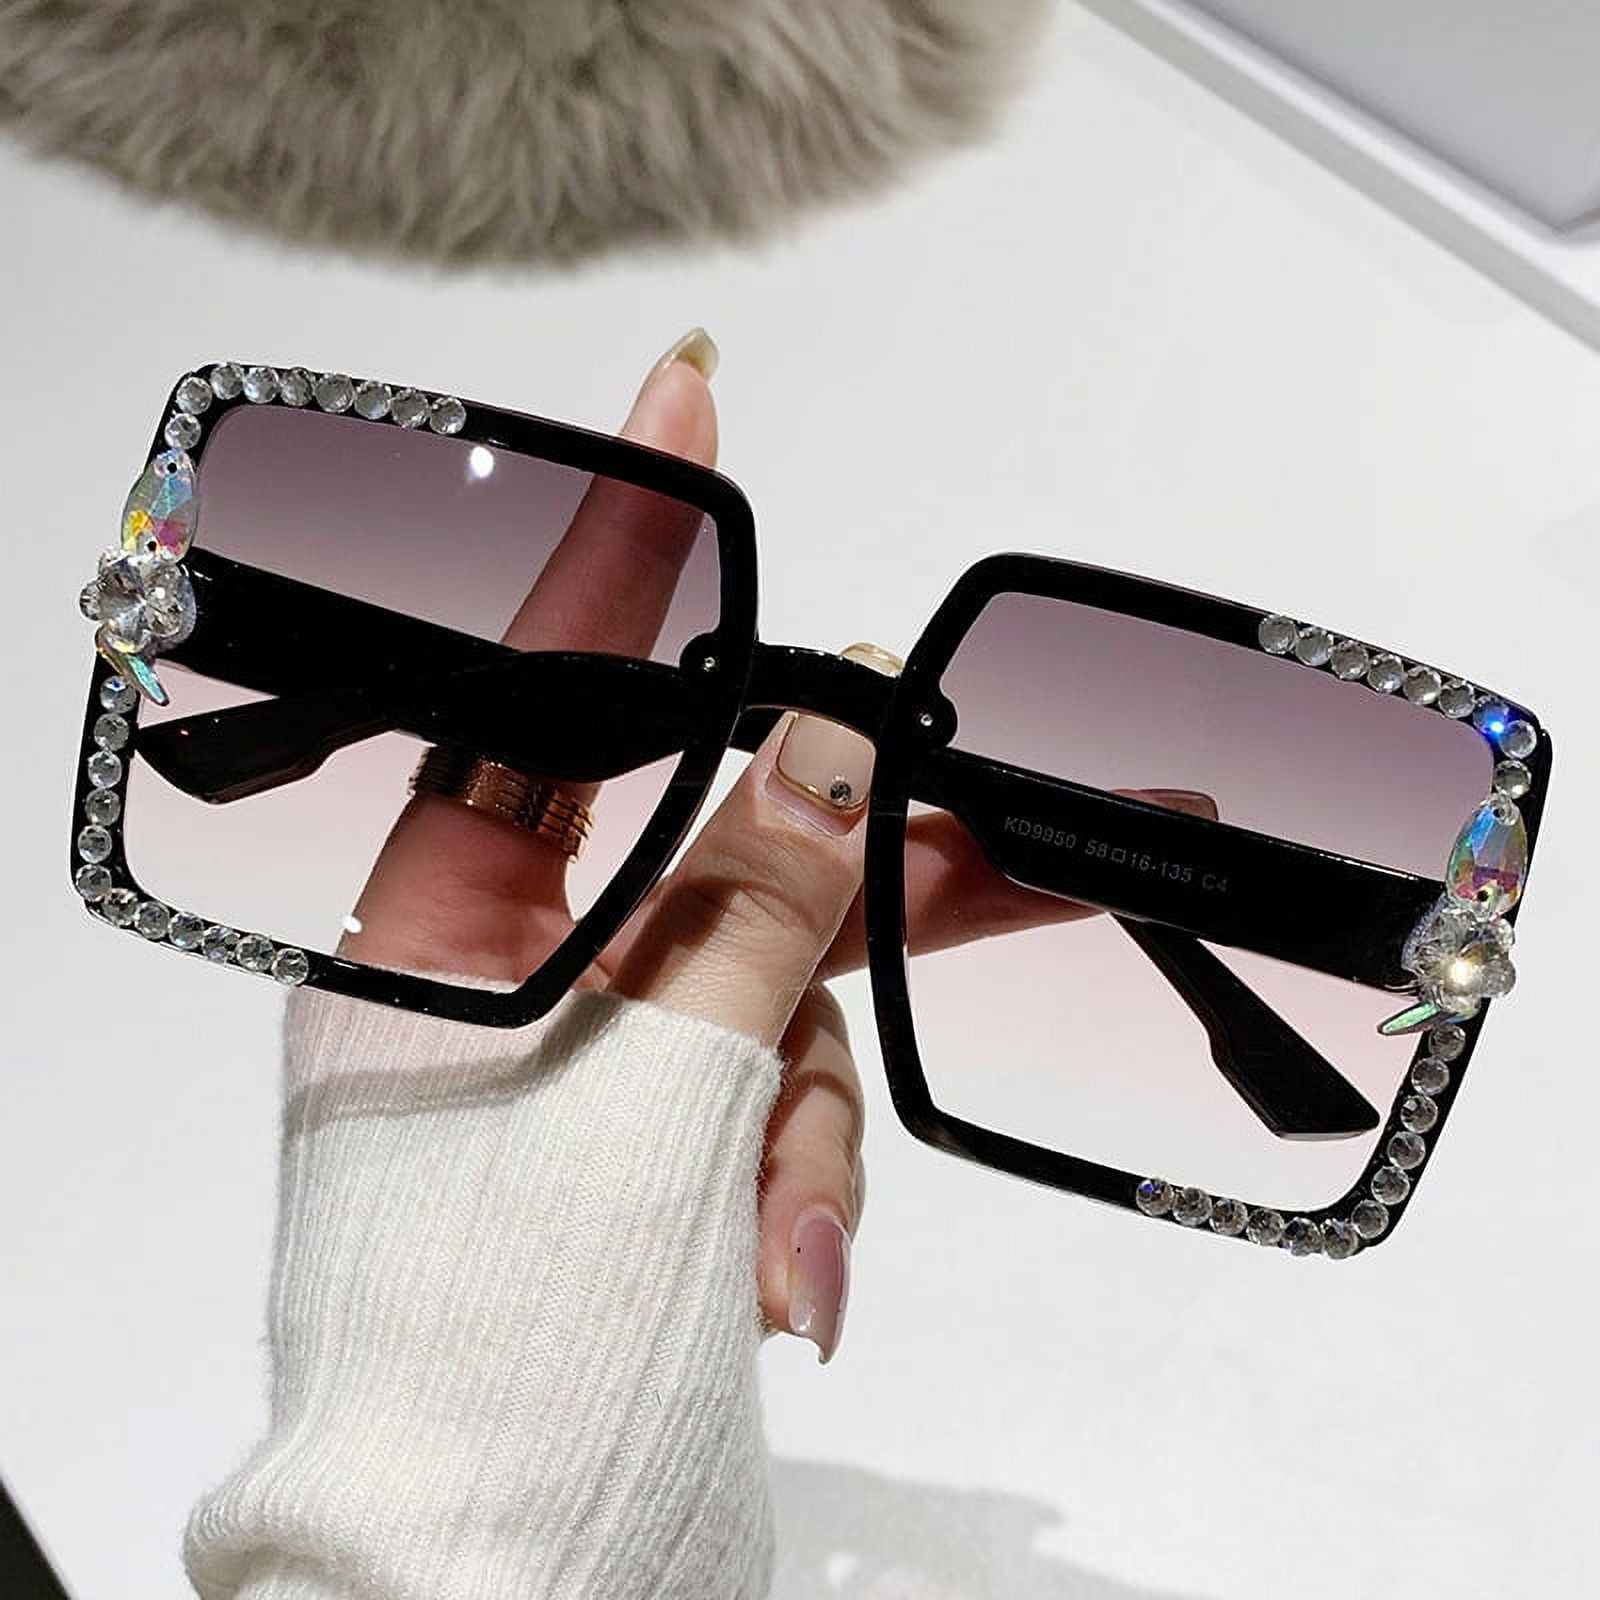 Accessories, New Women Sunglasses Large Squared Frame